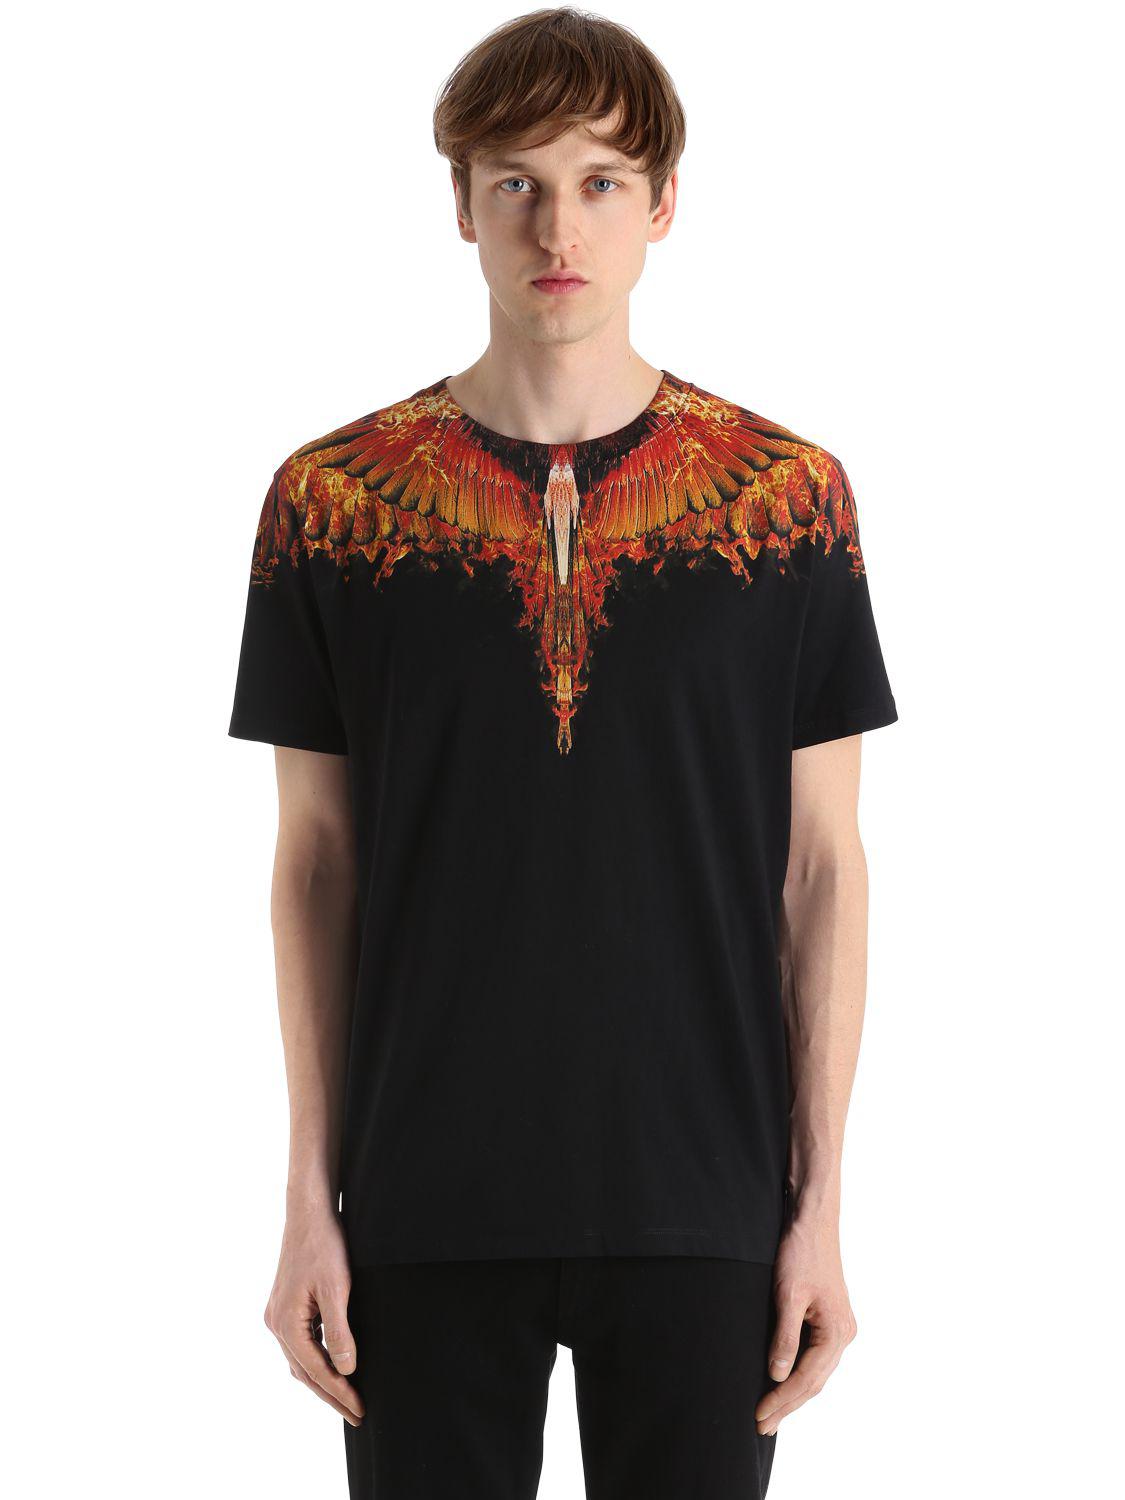 Marcelo Burlon Flame Wing Printed Jersey T-shirt in Black for Men - Lyst